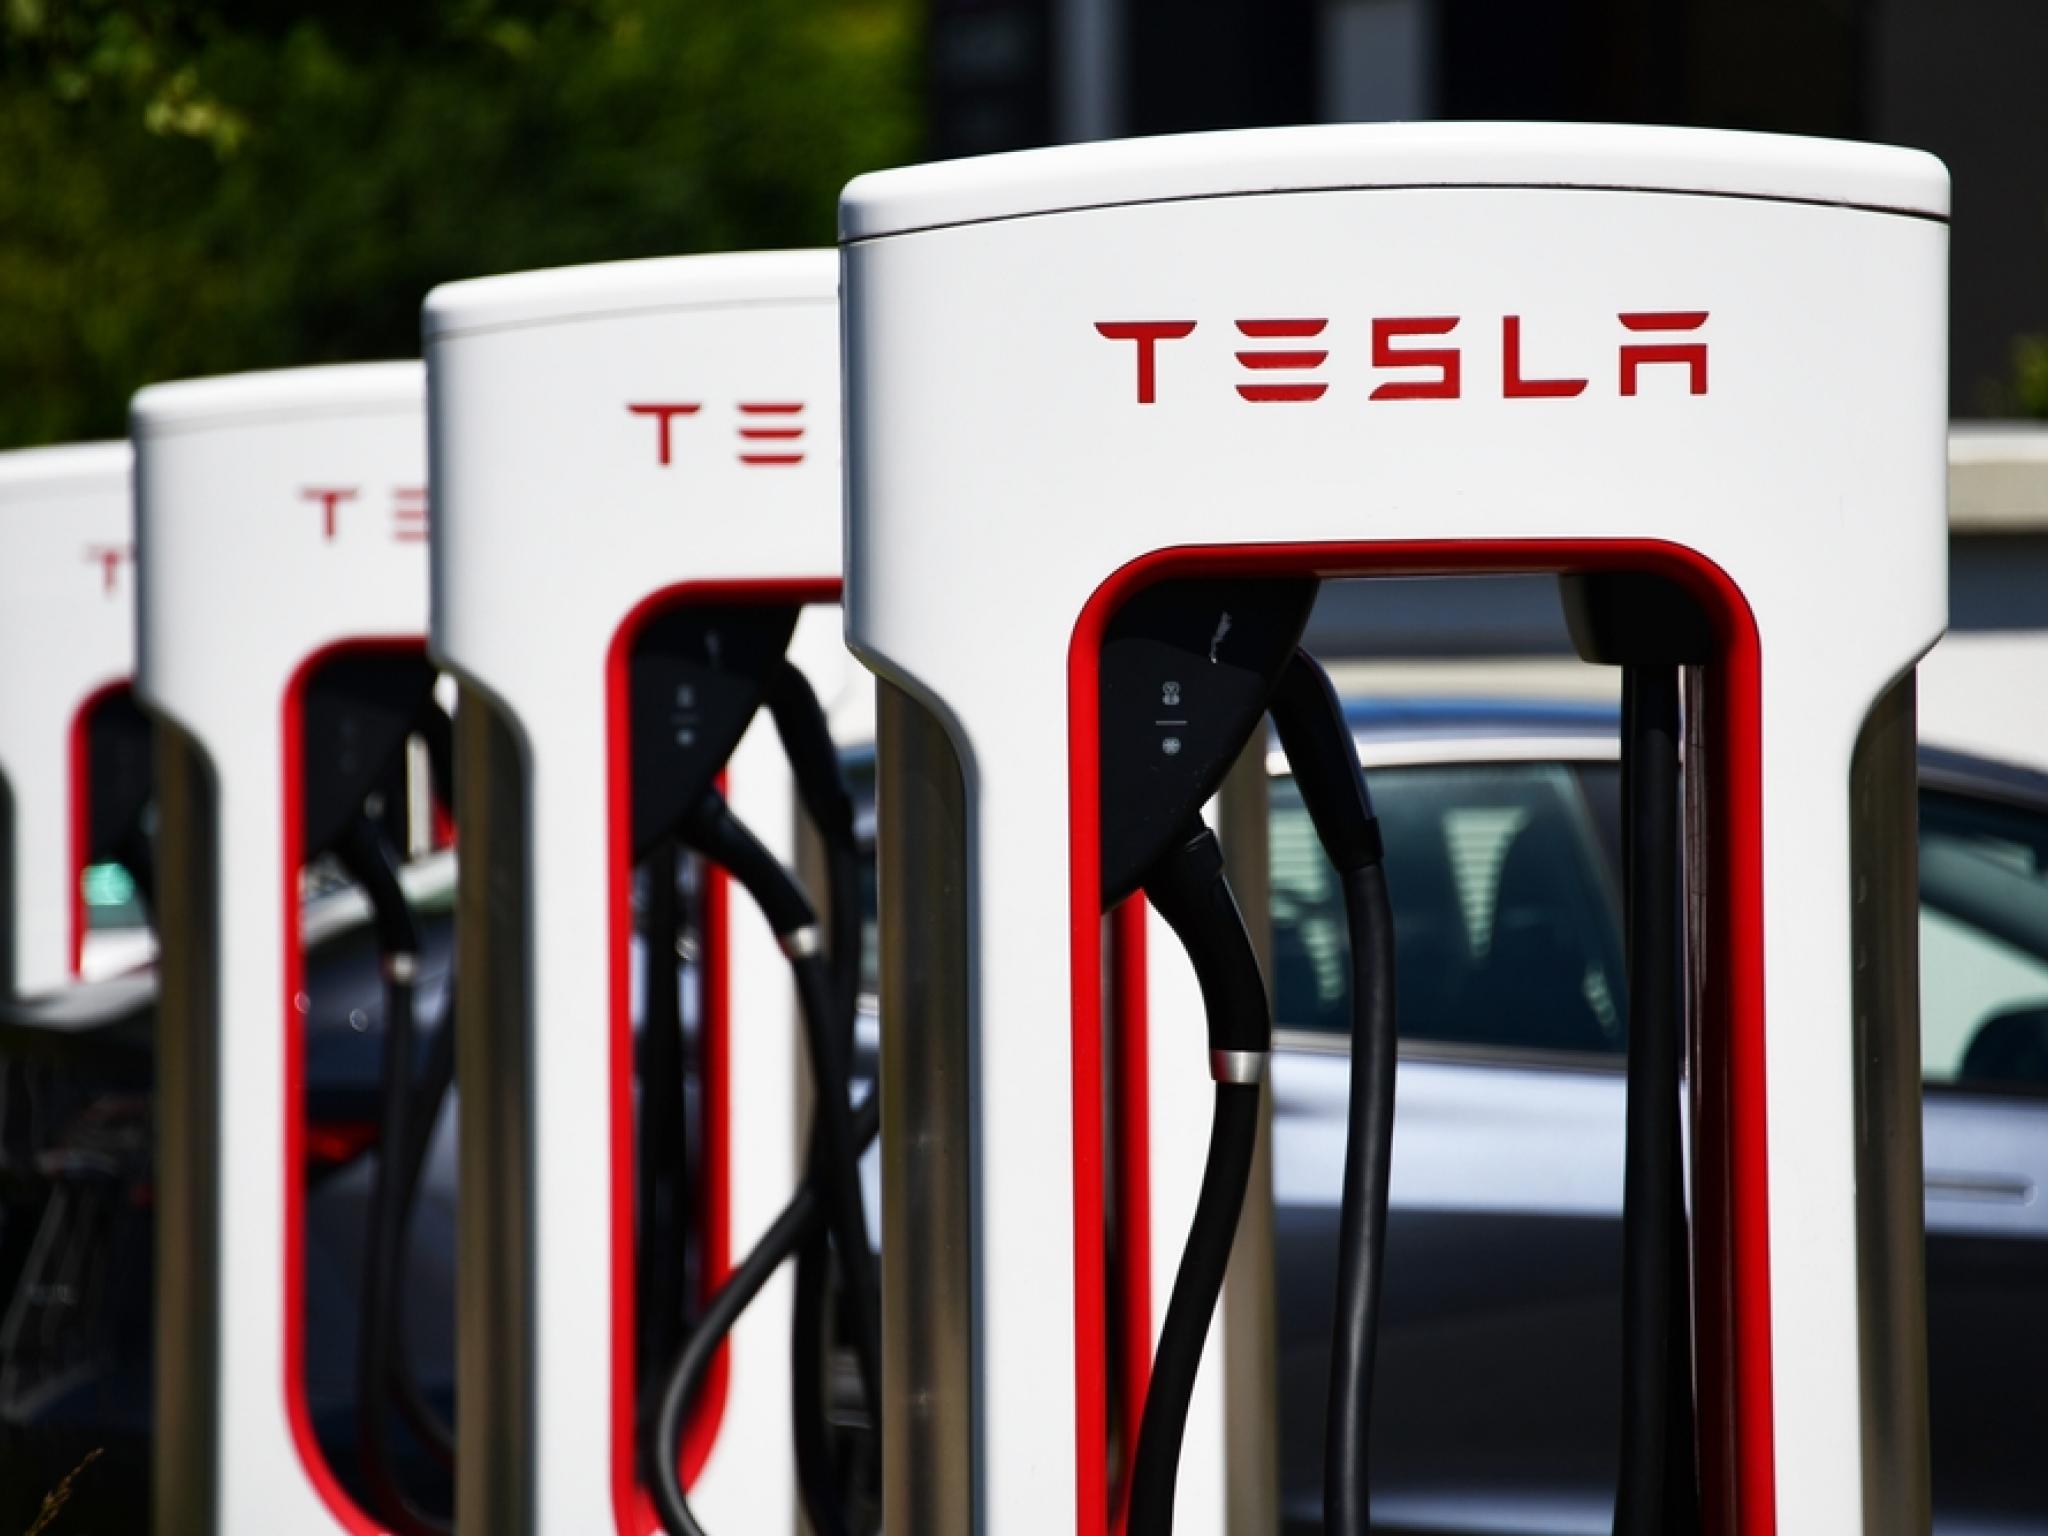  millions-for-what-tesla-reportedly-took-17m-in-federal-charging-grants-before-elon-musk-laid-off-supercharger-team 